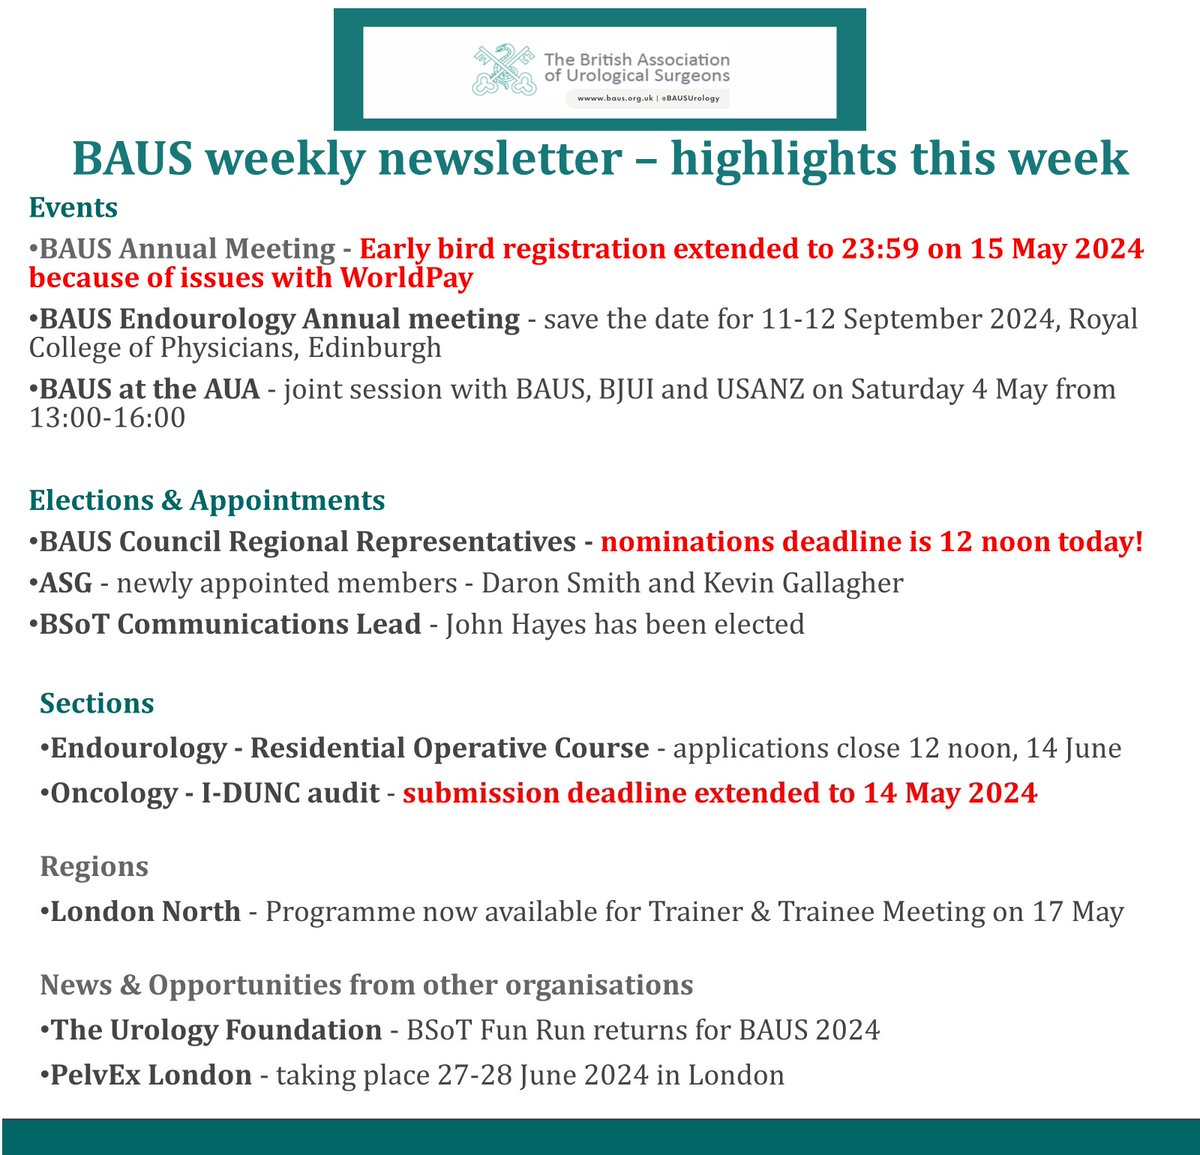 👀 BAUS weekly member newsletter has been sent today Didn't get the email? Click the link below - ow.ly/urGK50RtShA Having trouble accessing any of the links? Contact admin@baus.org.uk @BSoT_UK